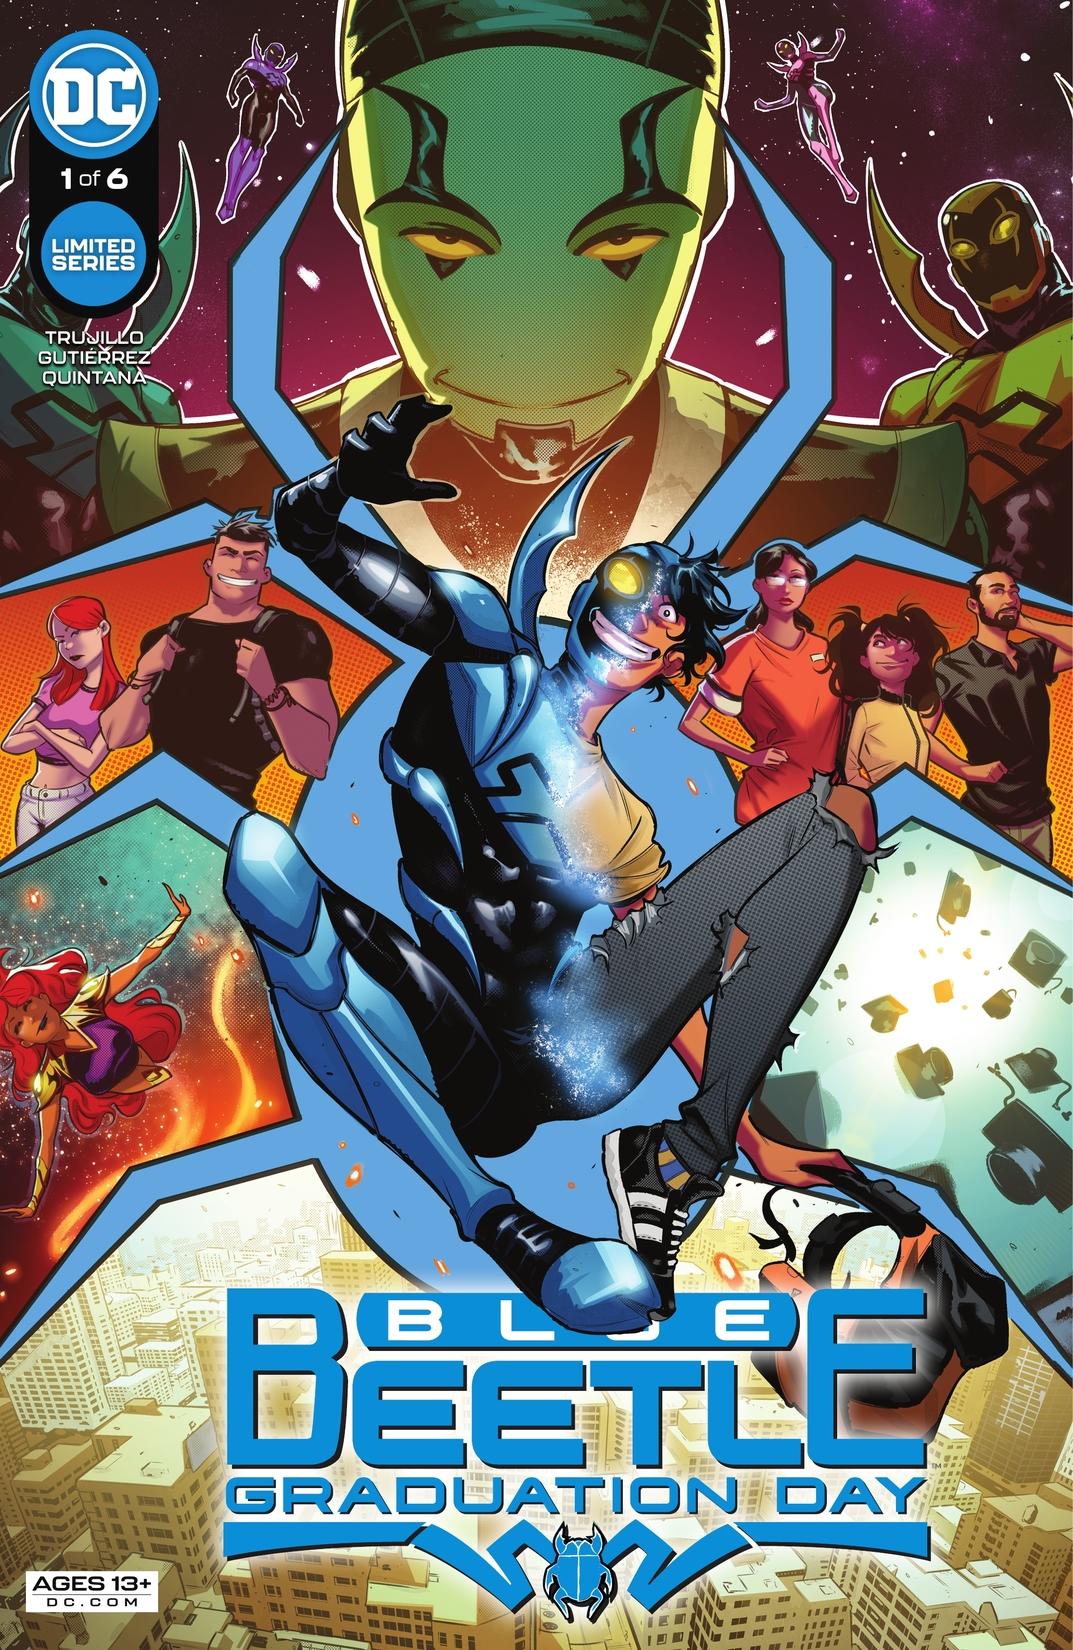 Blue Beetle trailer: a first look at DC's newest superhero movie - The Verge